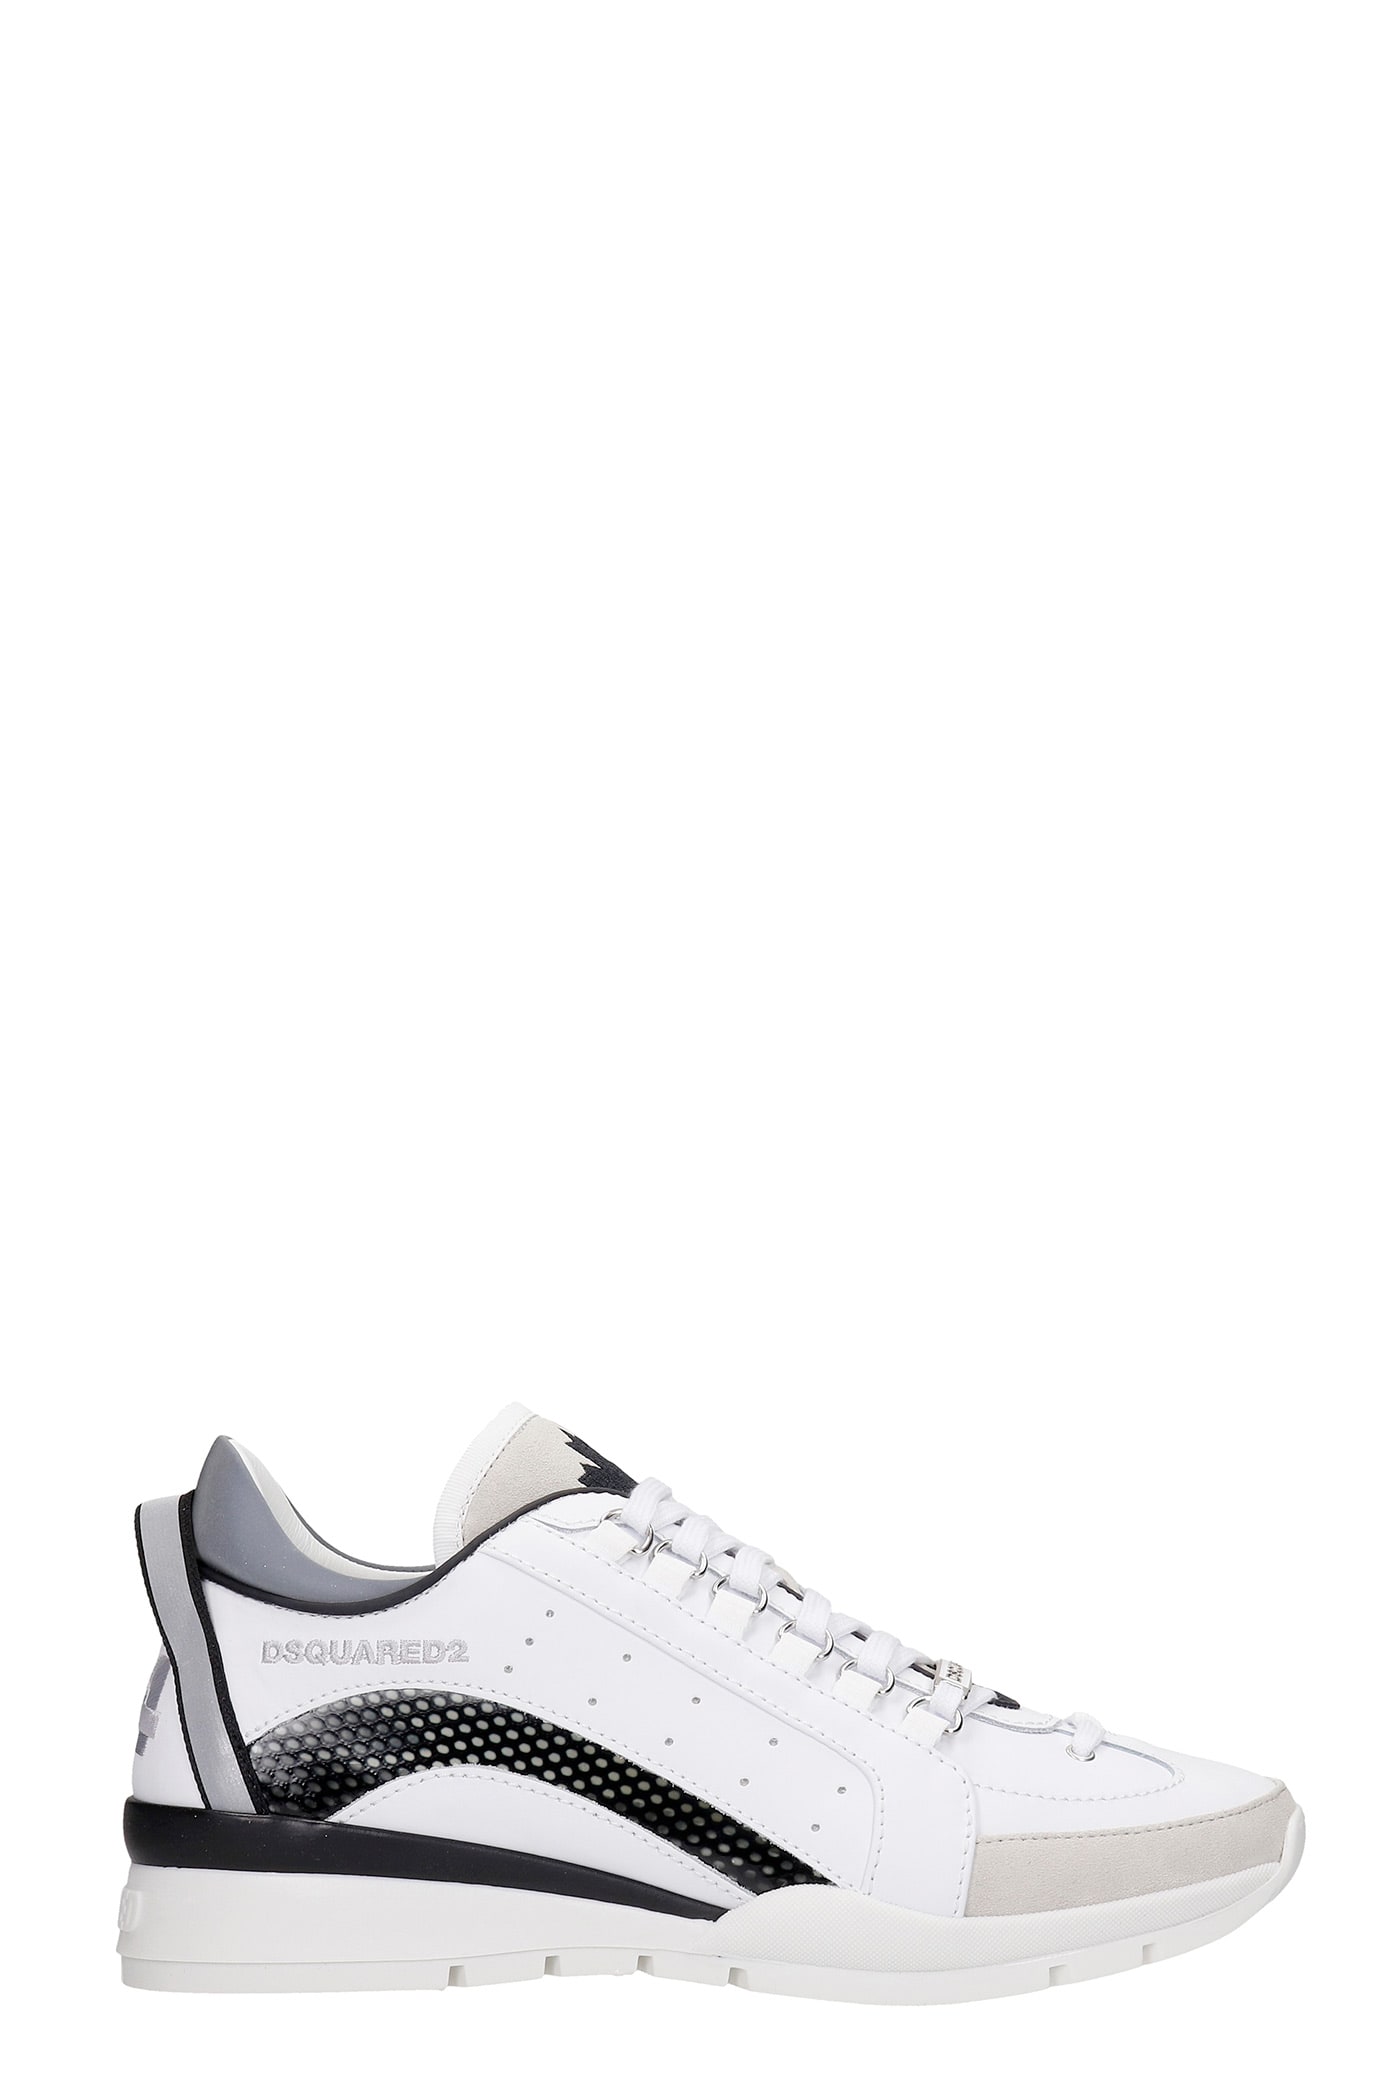 Dsquared2 Sneakers 551 SNEAKERS IN WHITE LEATHER